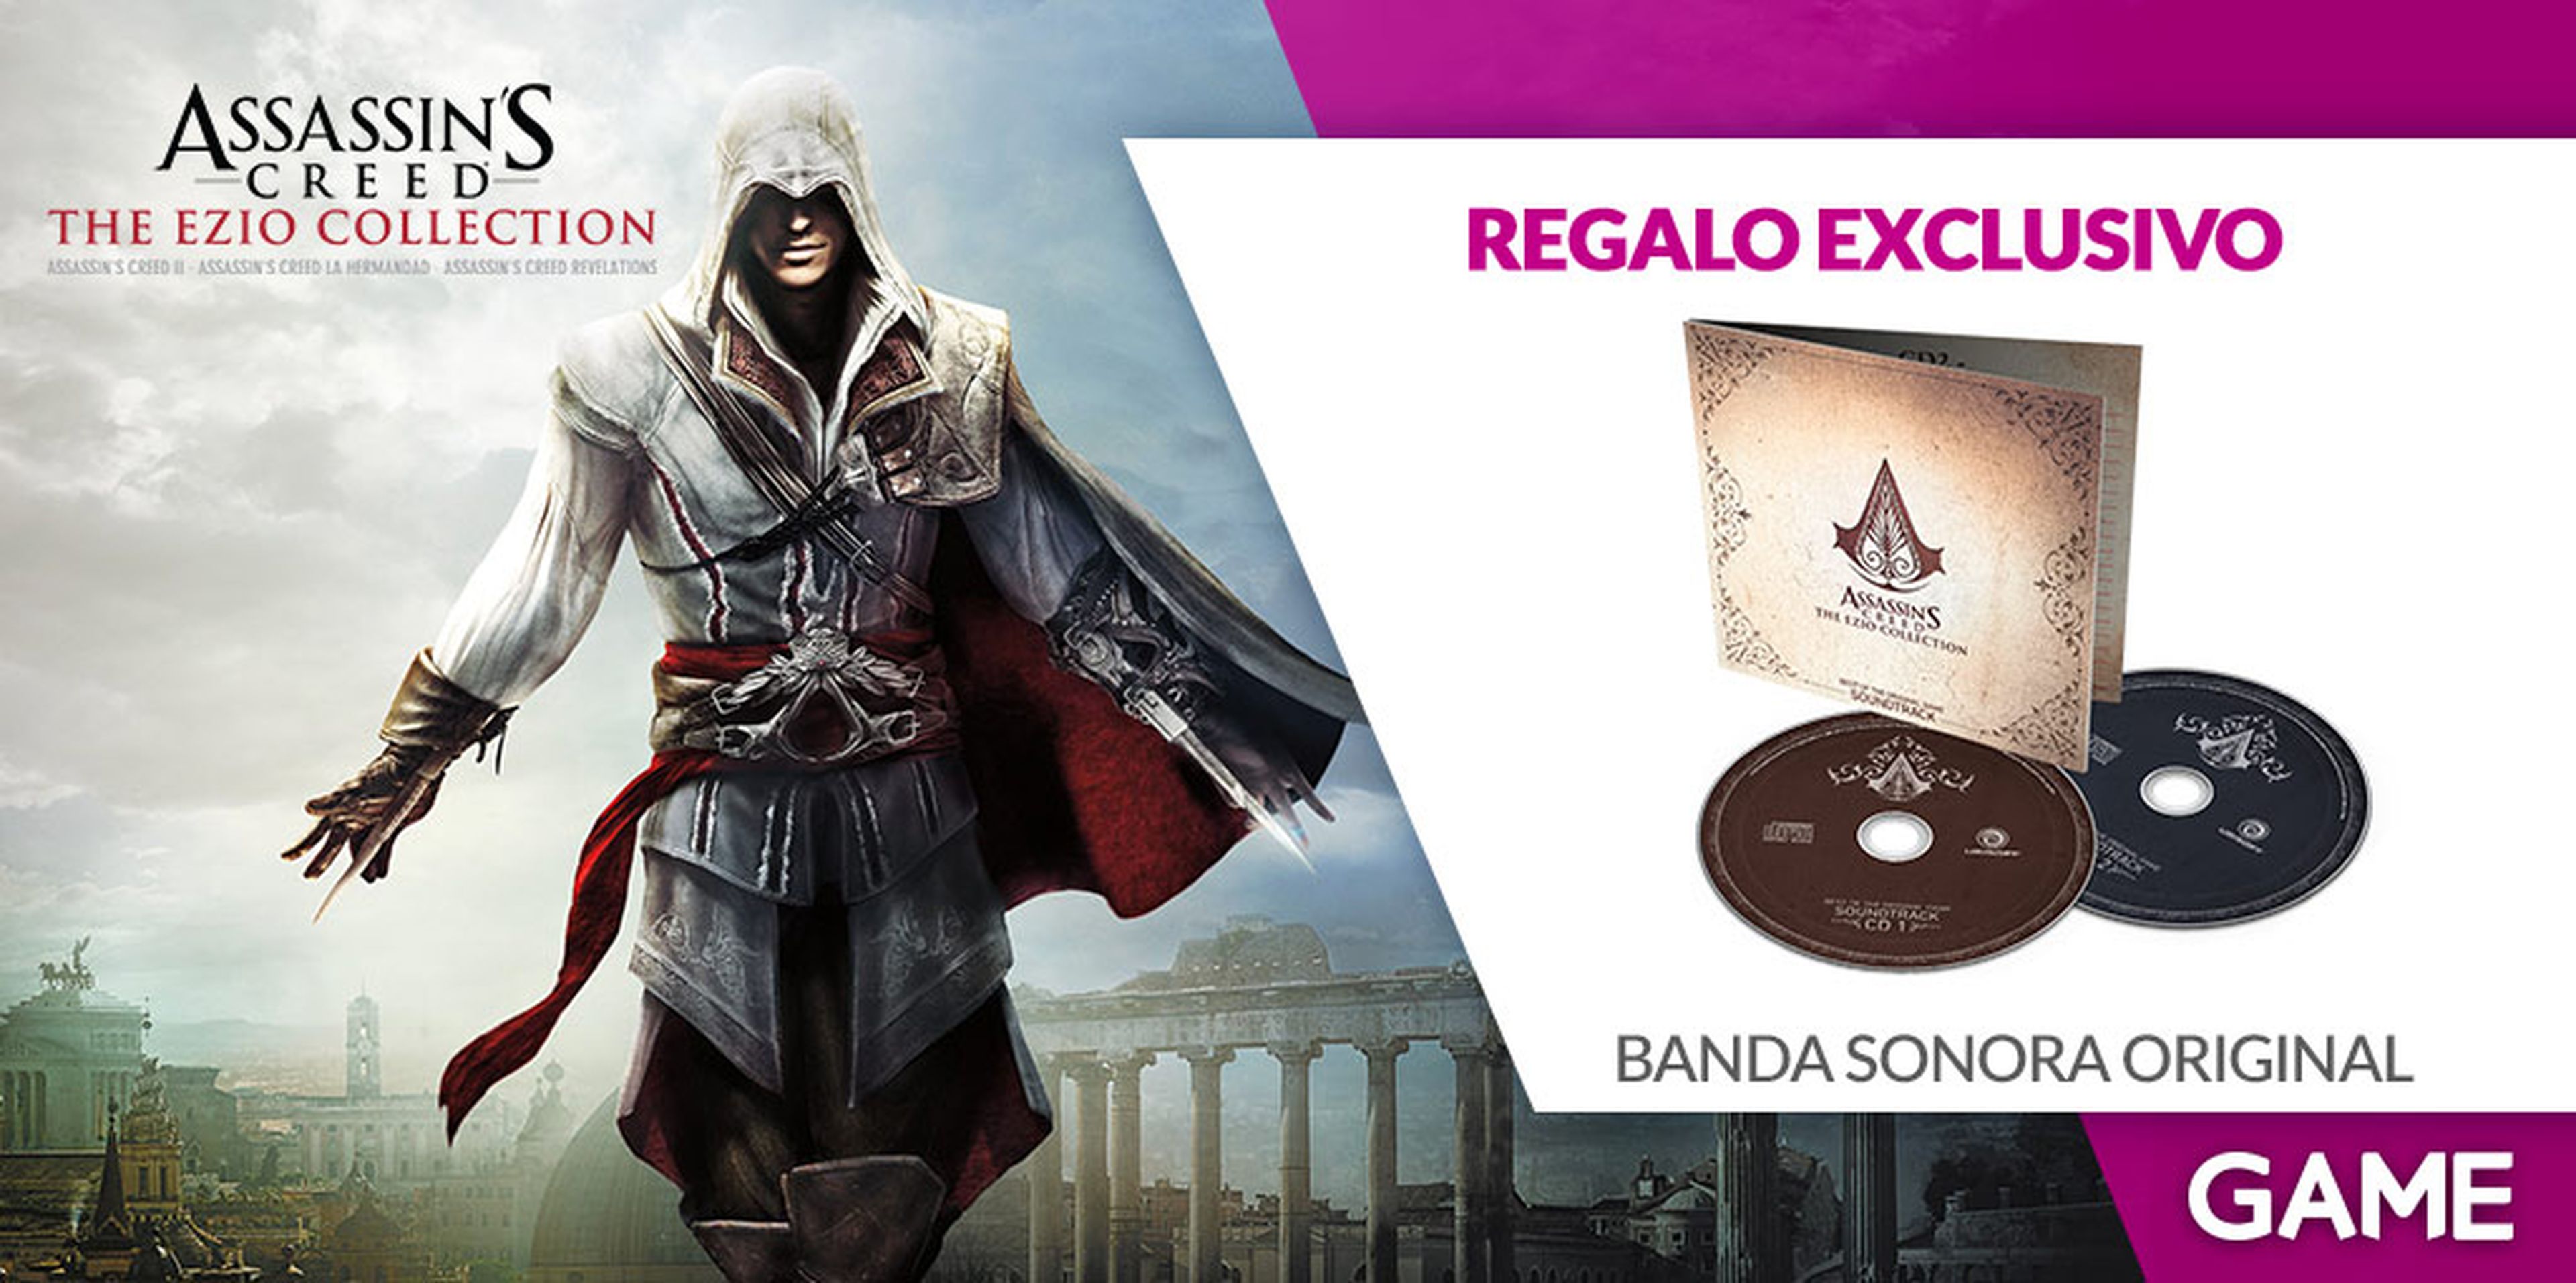 Assassin's Creed The Ezio Collection GAME